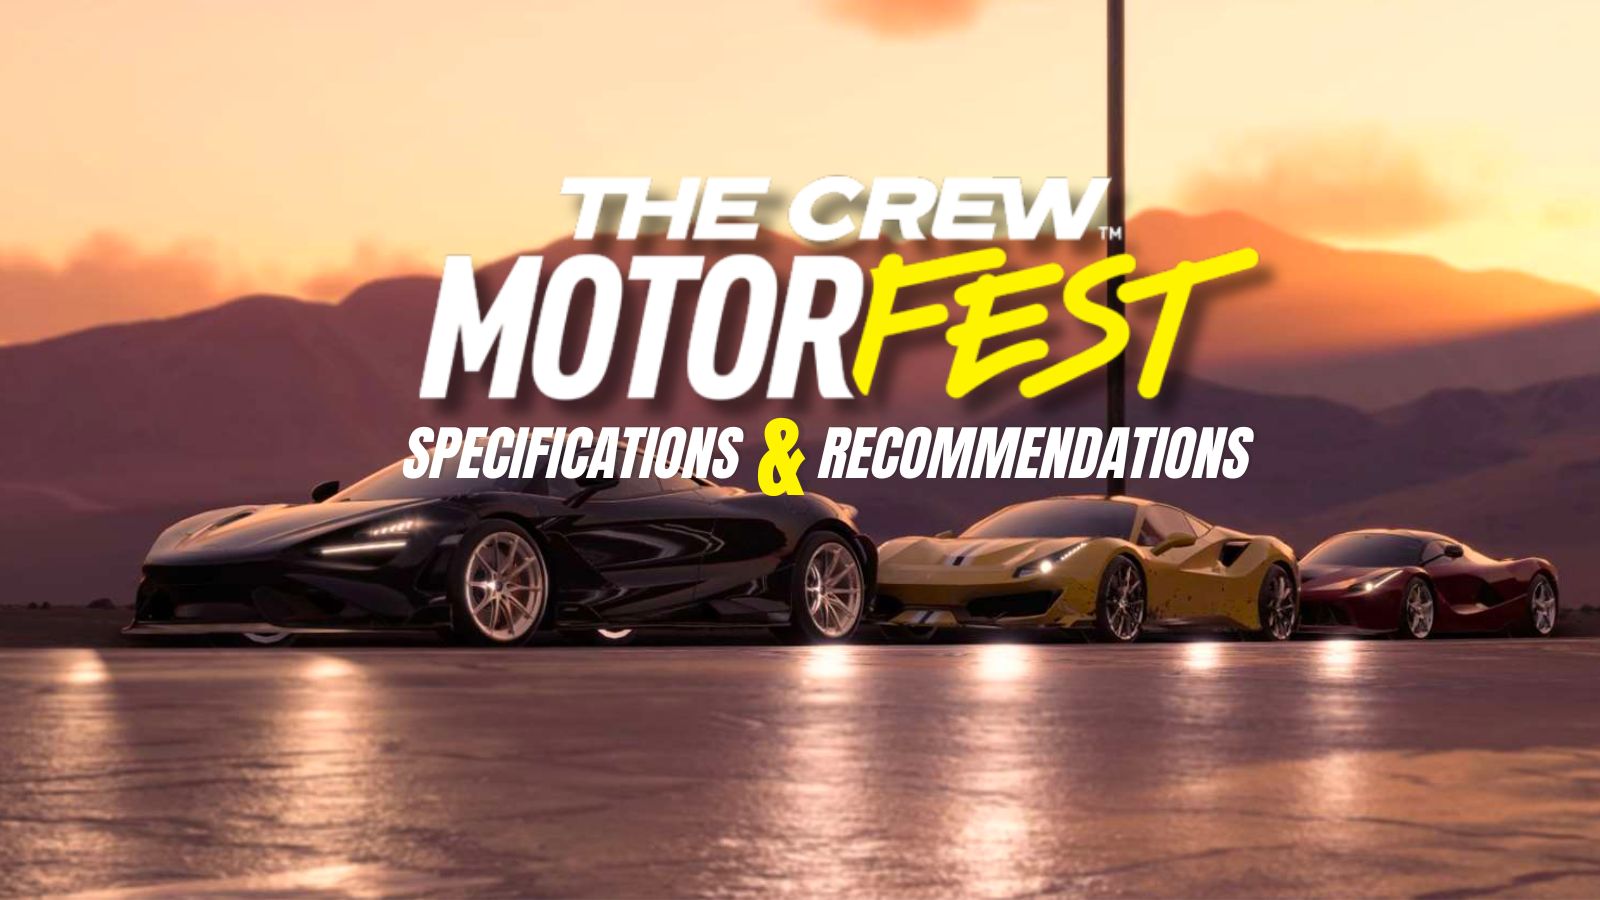 How to play cross play on the crew motor fest｜TikTok Search